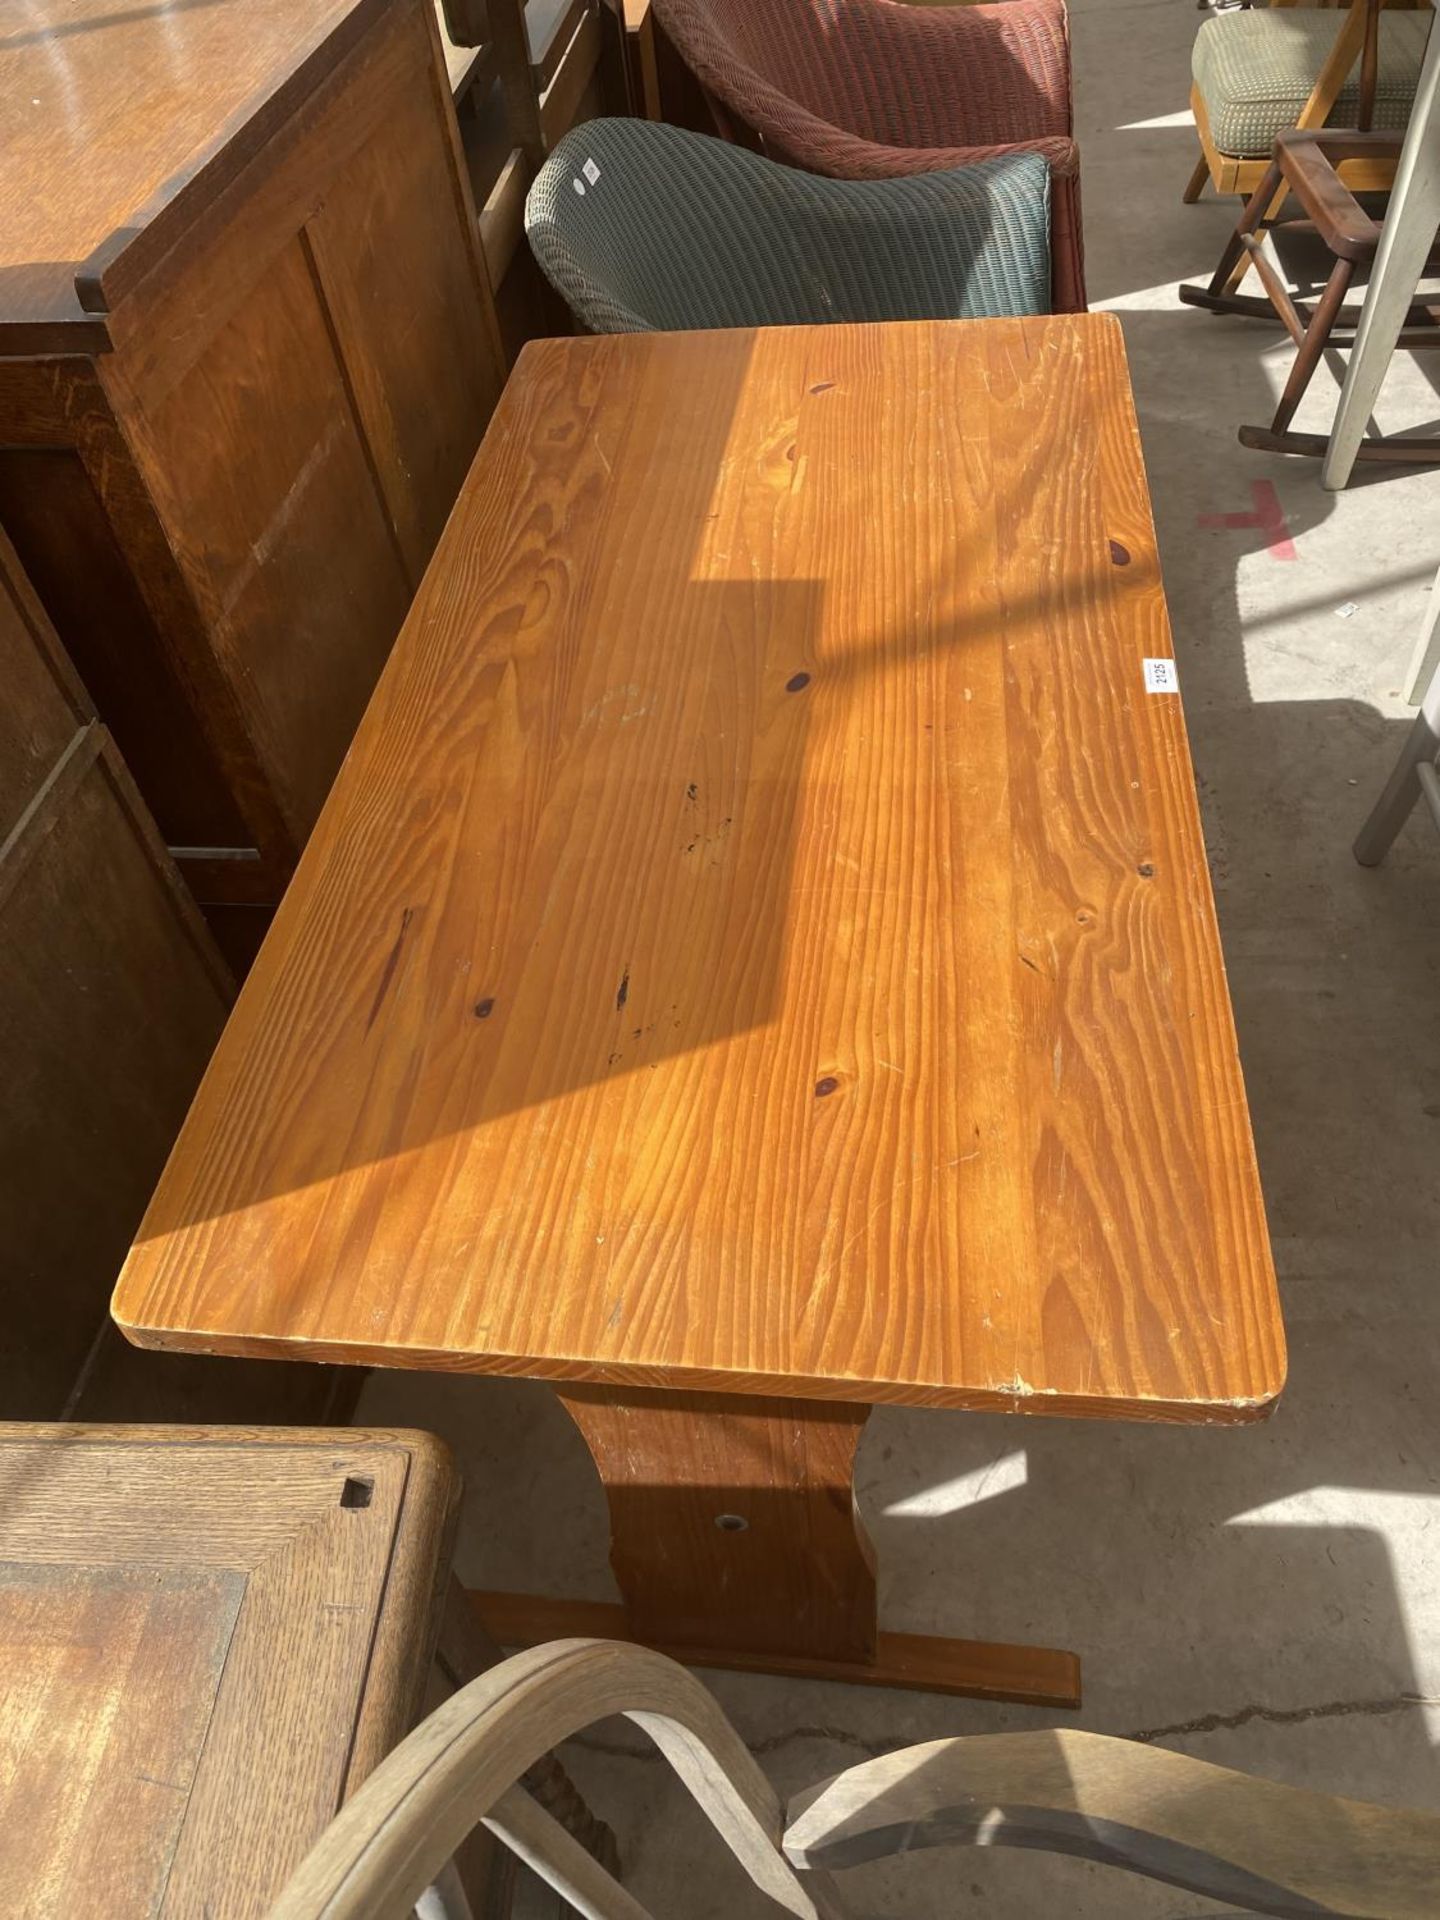 A MODERN PINE KITCHEN TABLE, 44.5X23.5" - Image 2 of 4